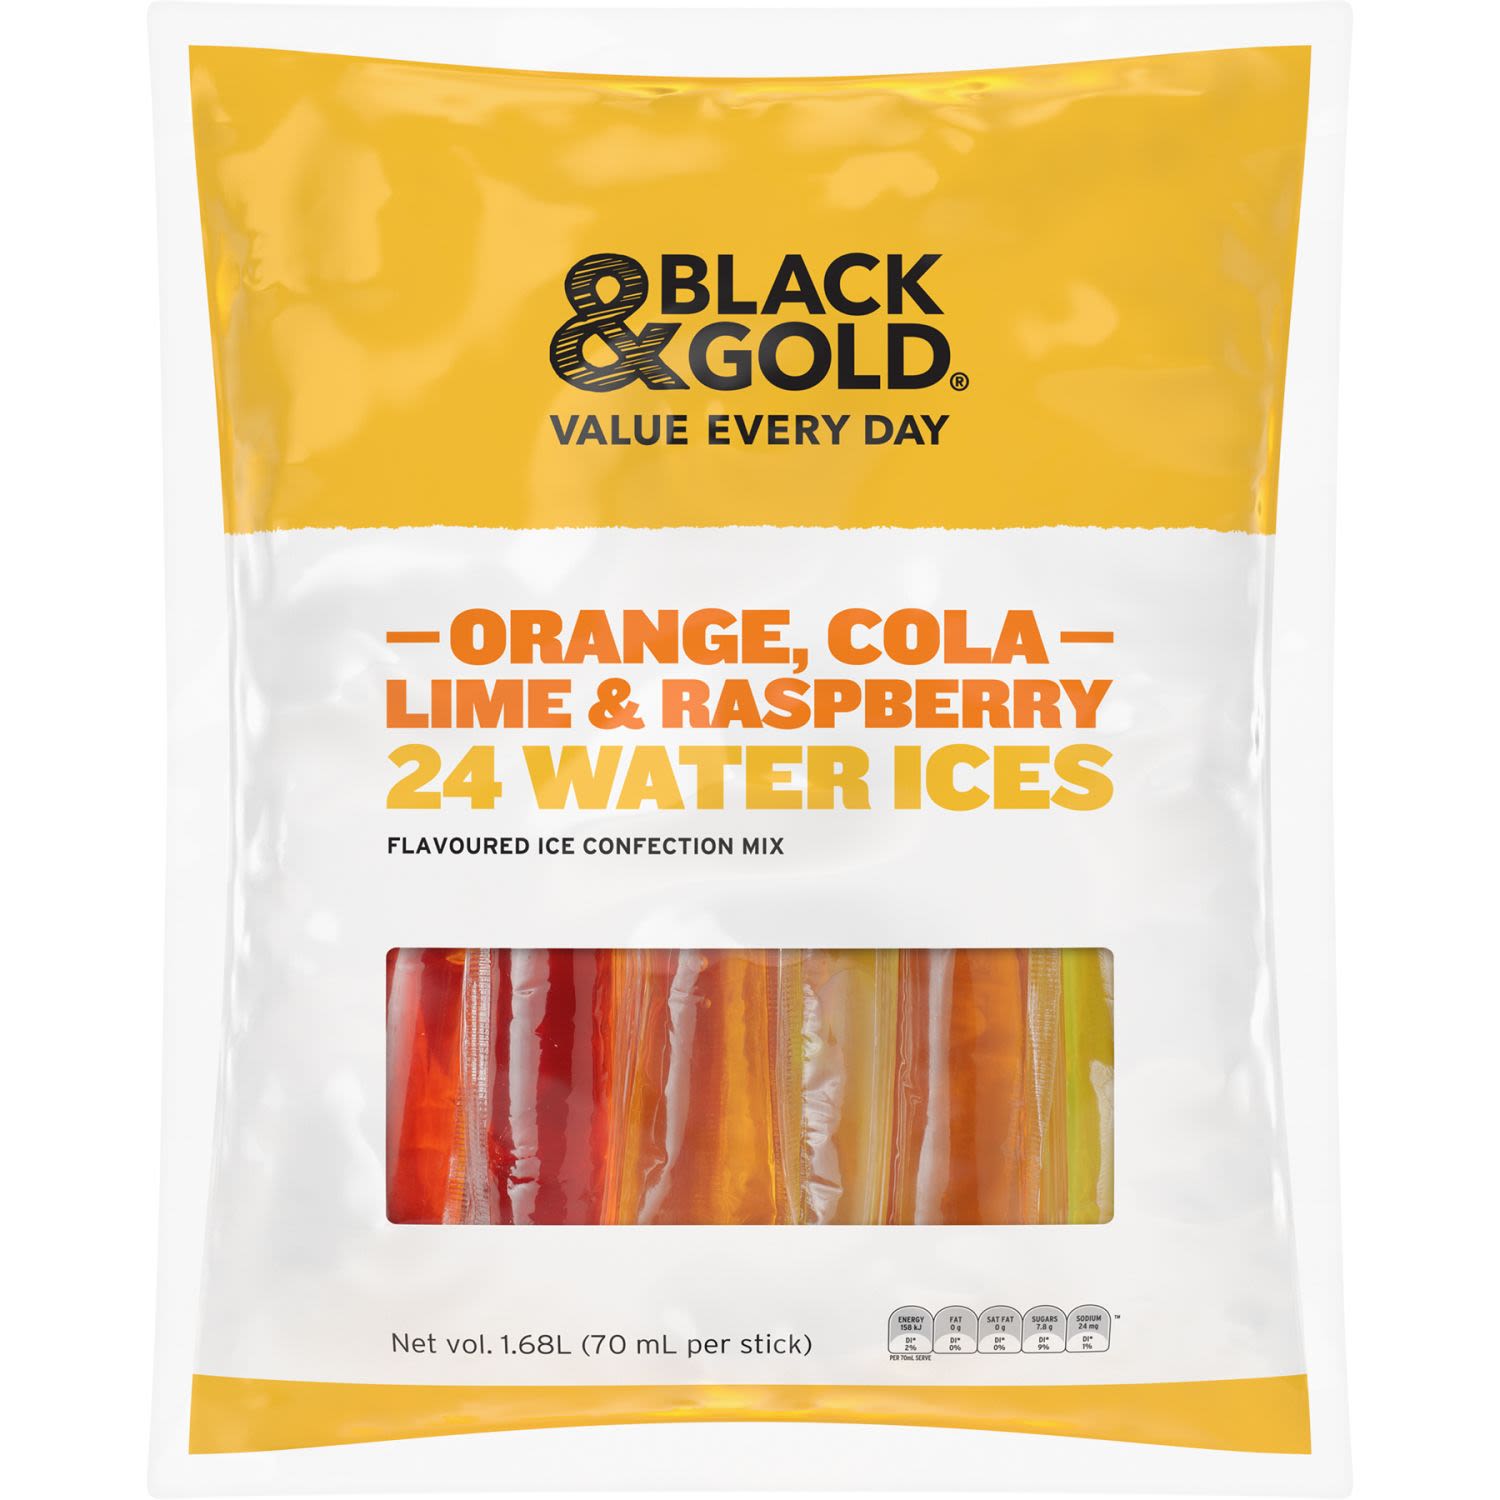 Black & Gold Orange, Cola, Lime & Raspberry Water Ices, 24 Each